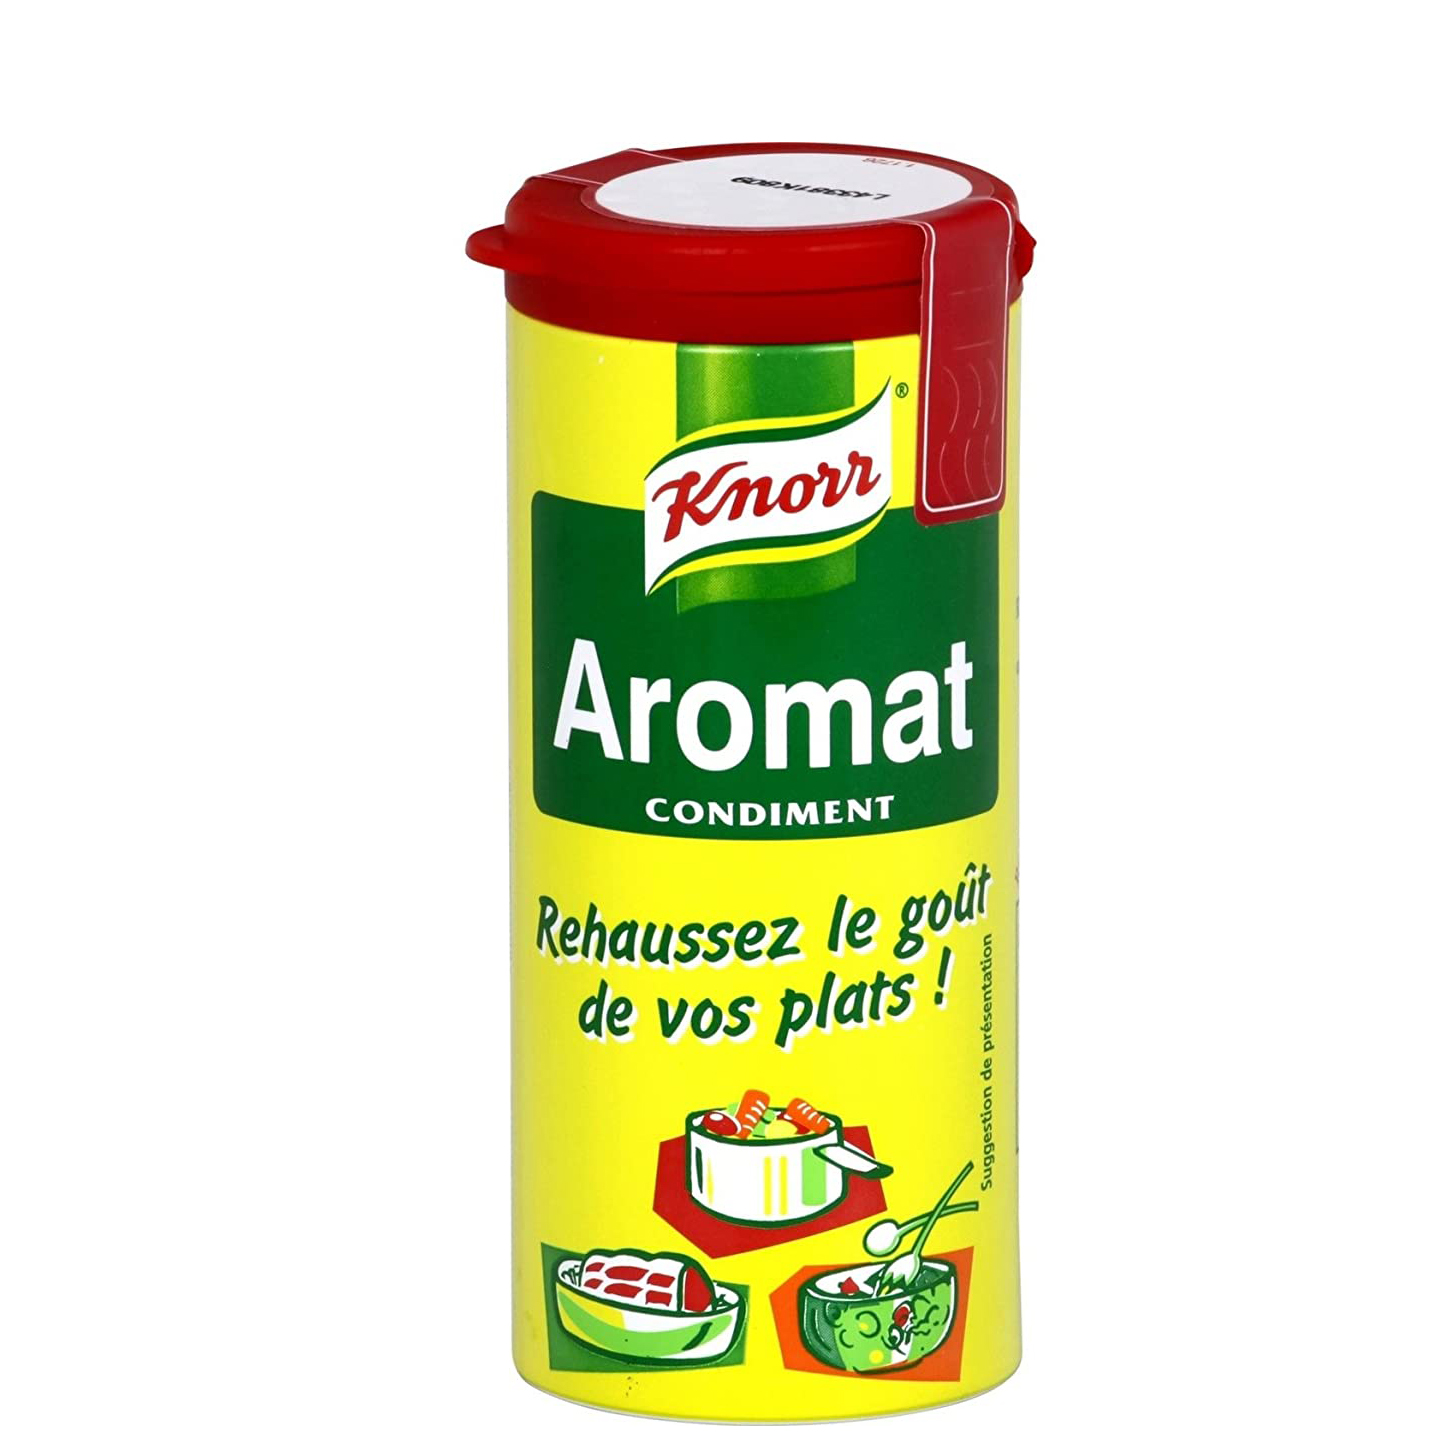 Aromat knor/count